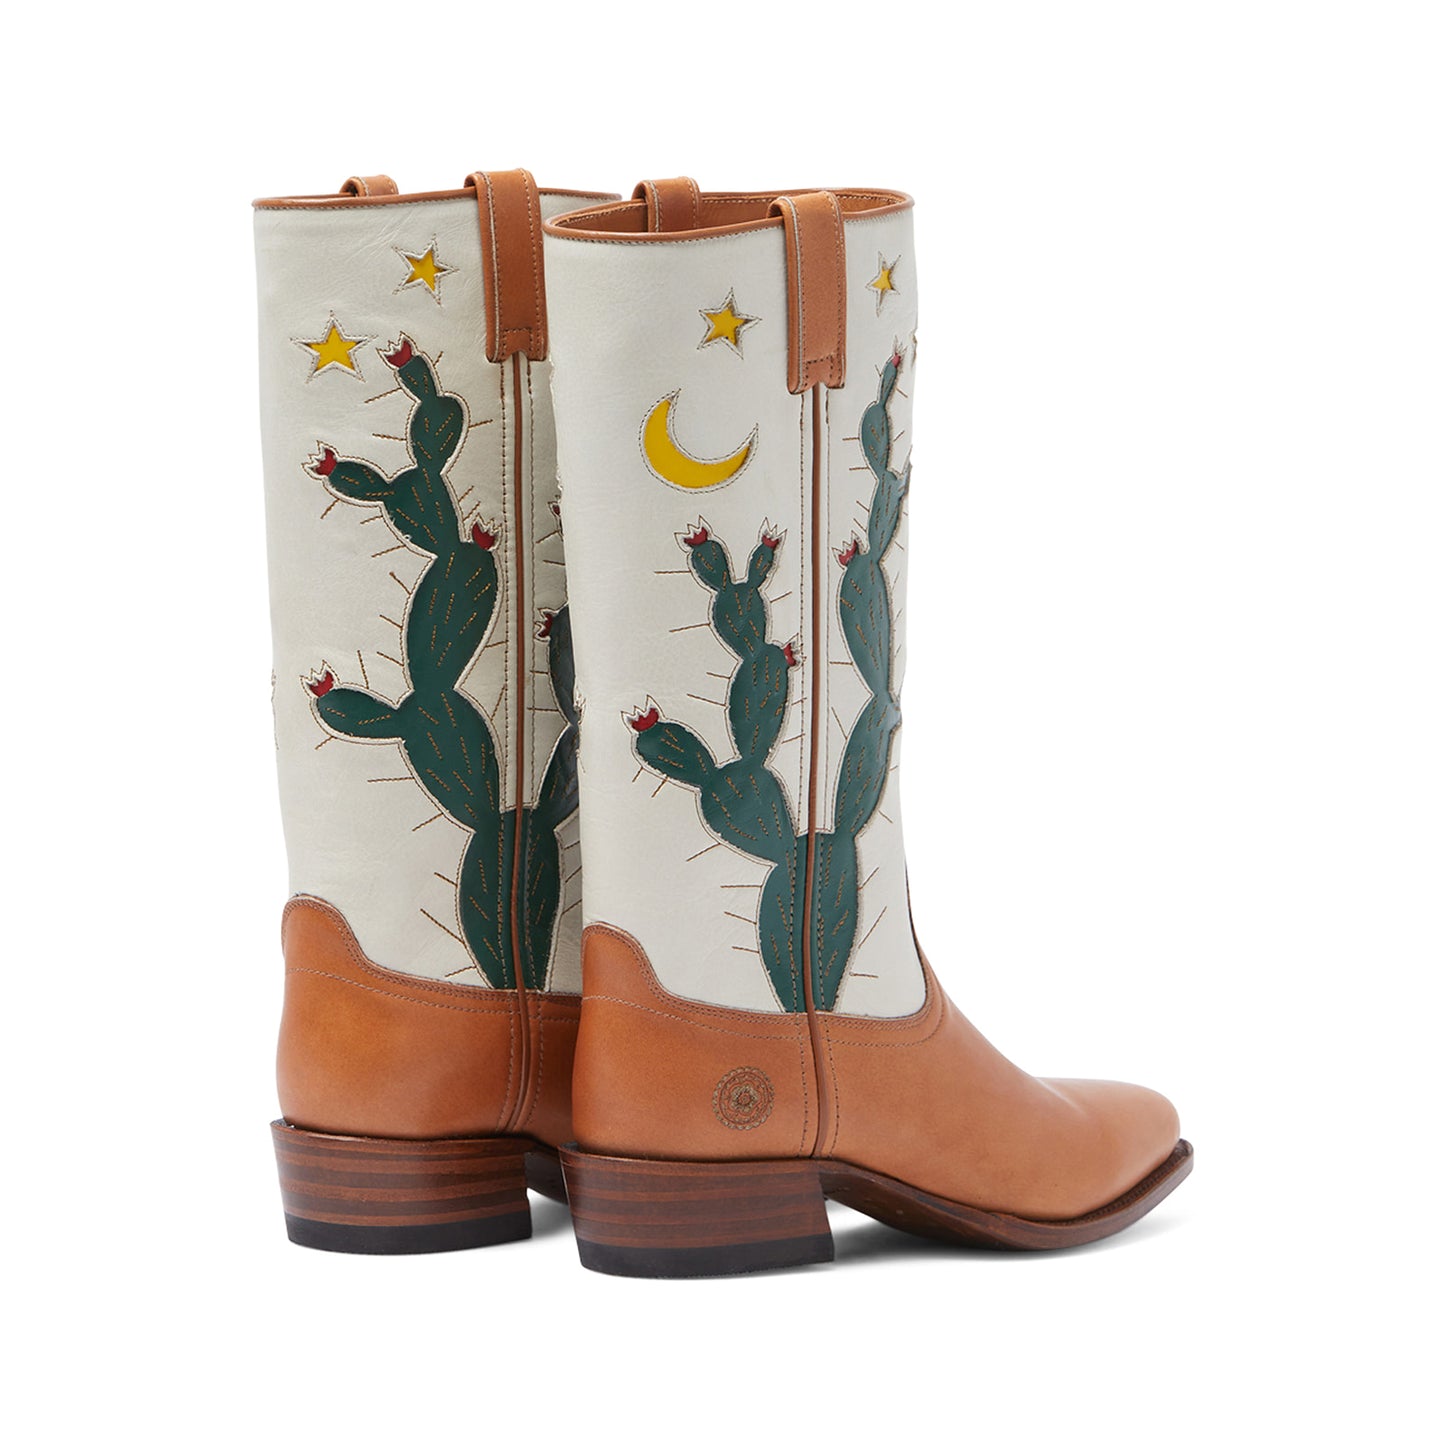 ARCHER PRICKLY TALL_WOMEN'S WESTERN_BACK BOOT PAIR